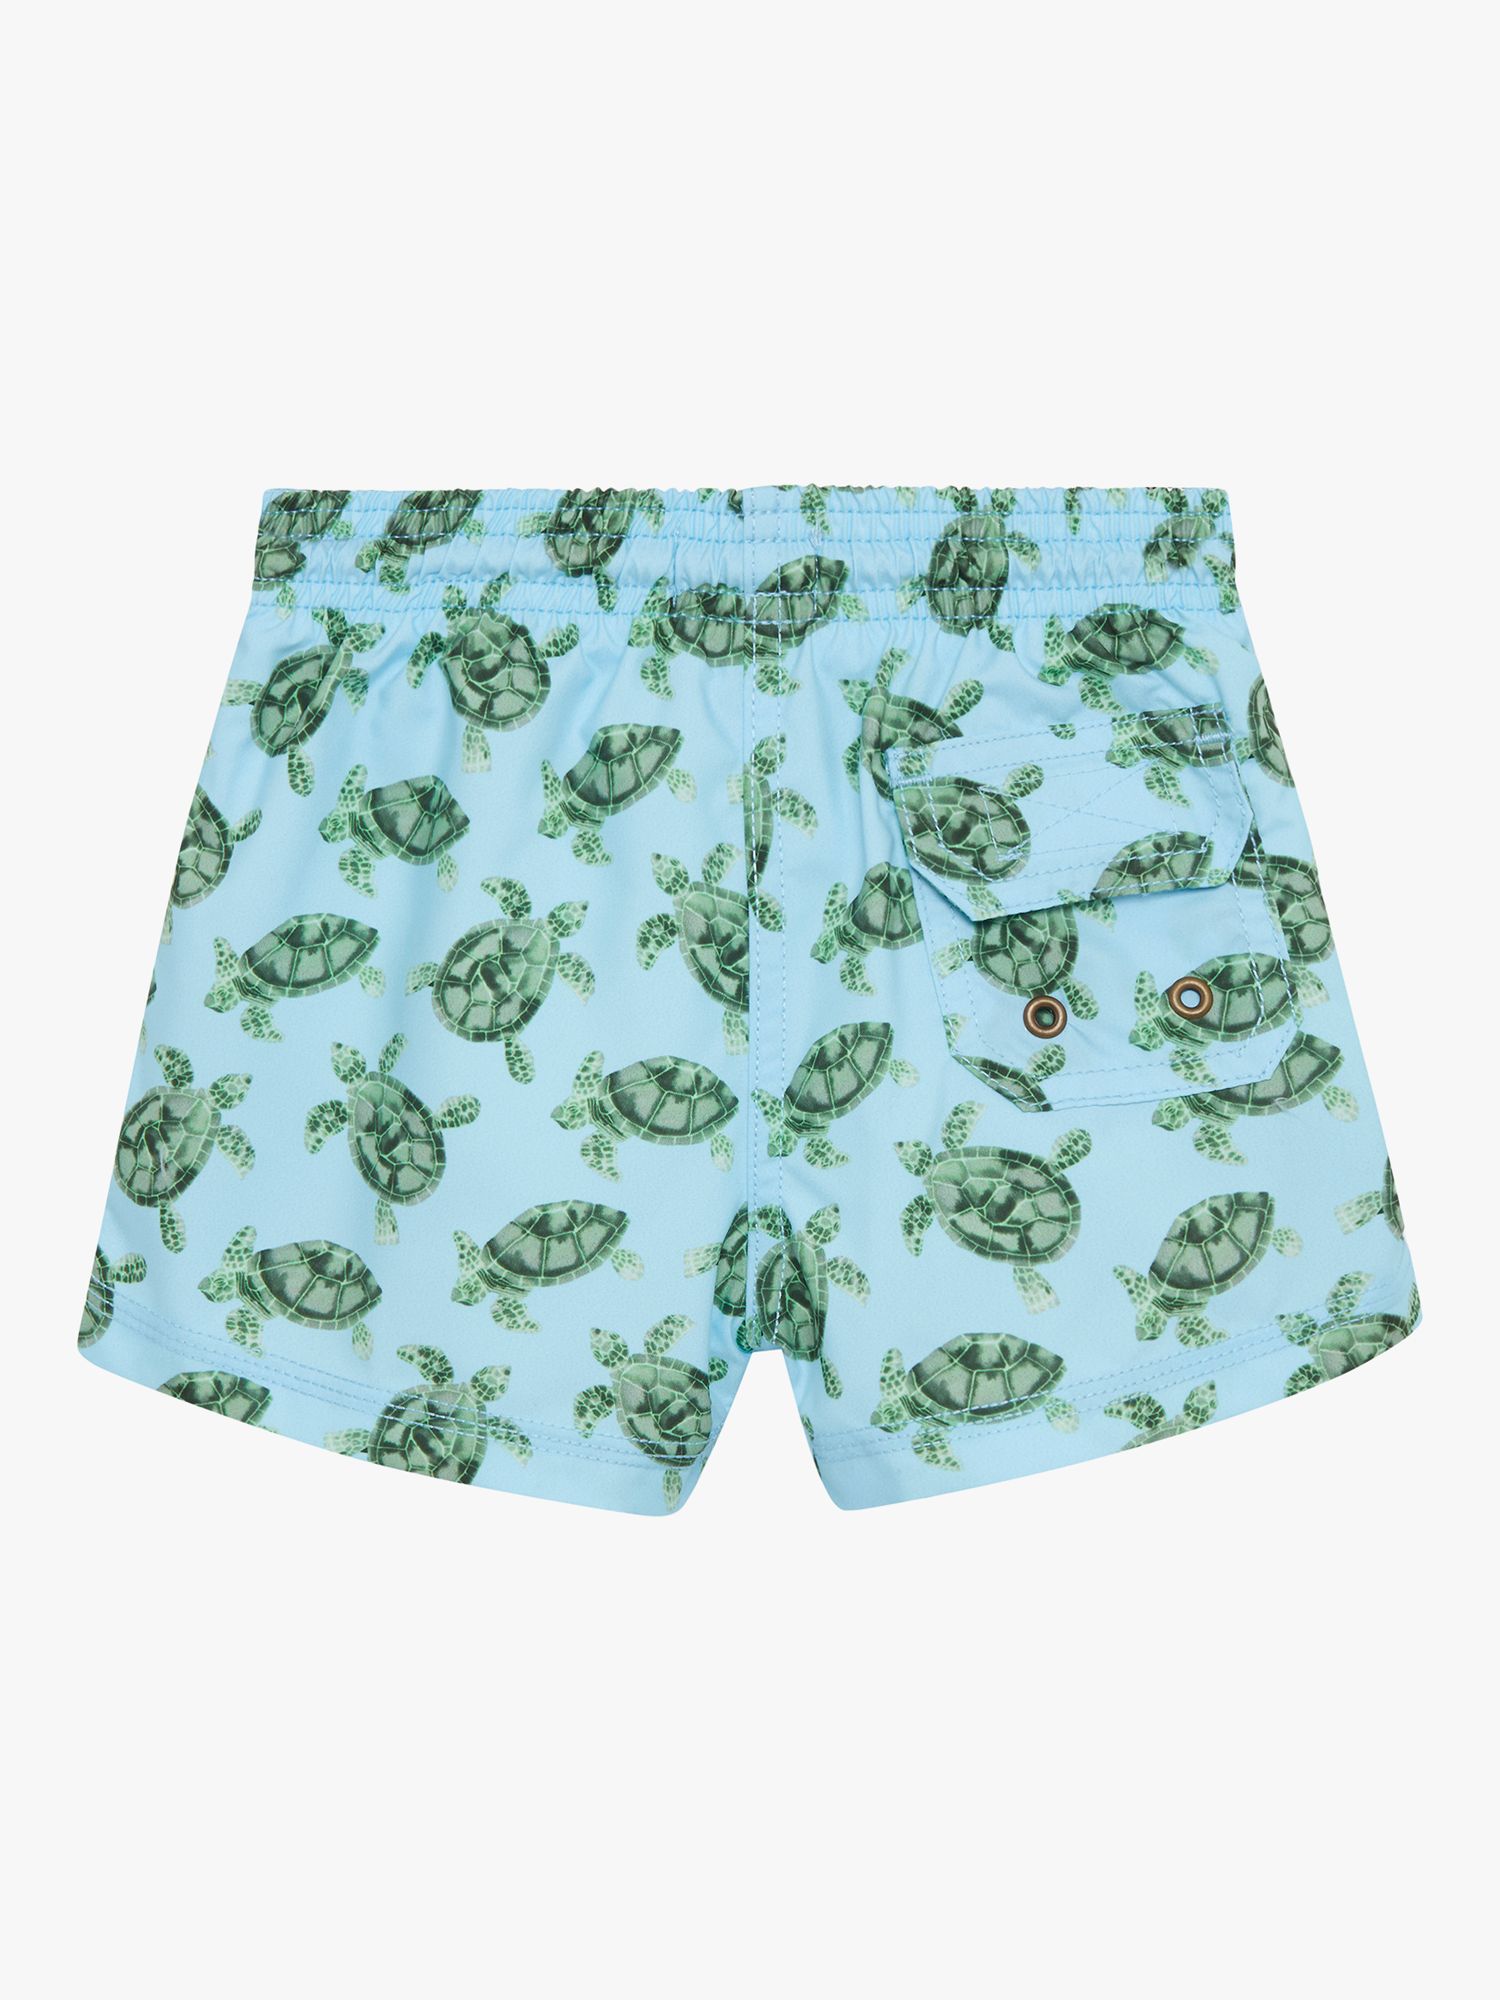 Trotters Baby Turtle Swim Shorts, Blue, 3-6 months